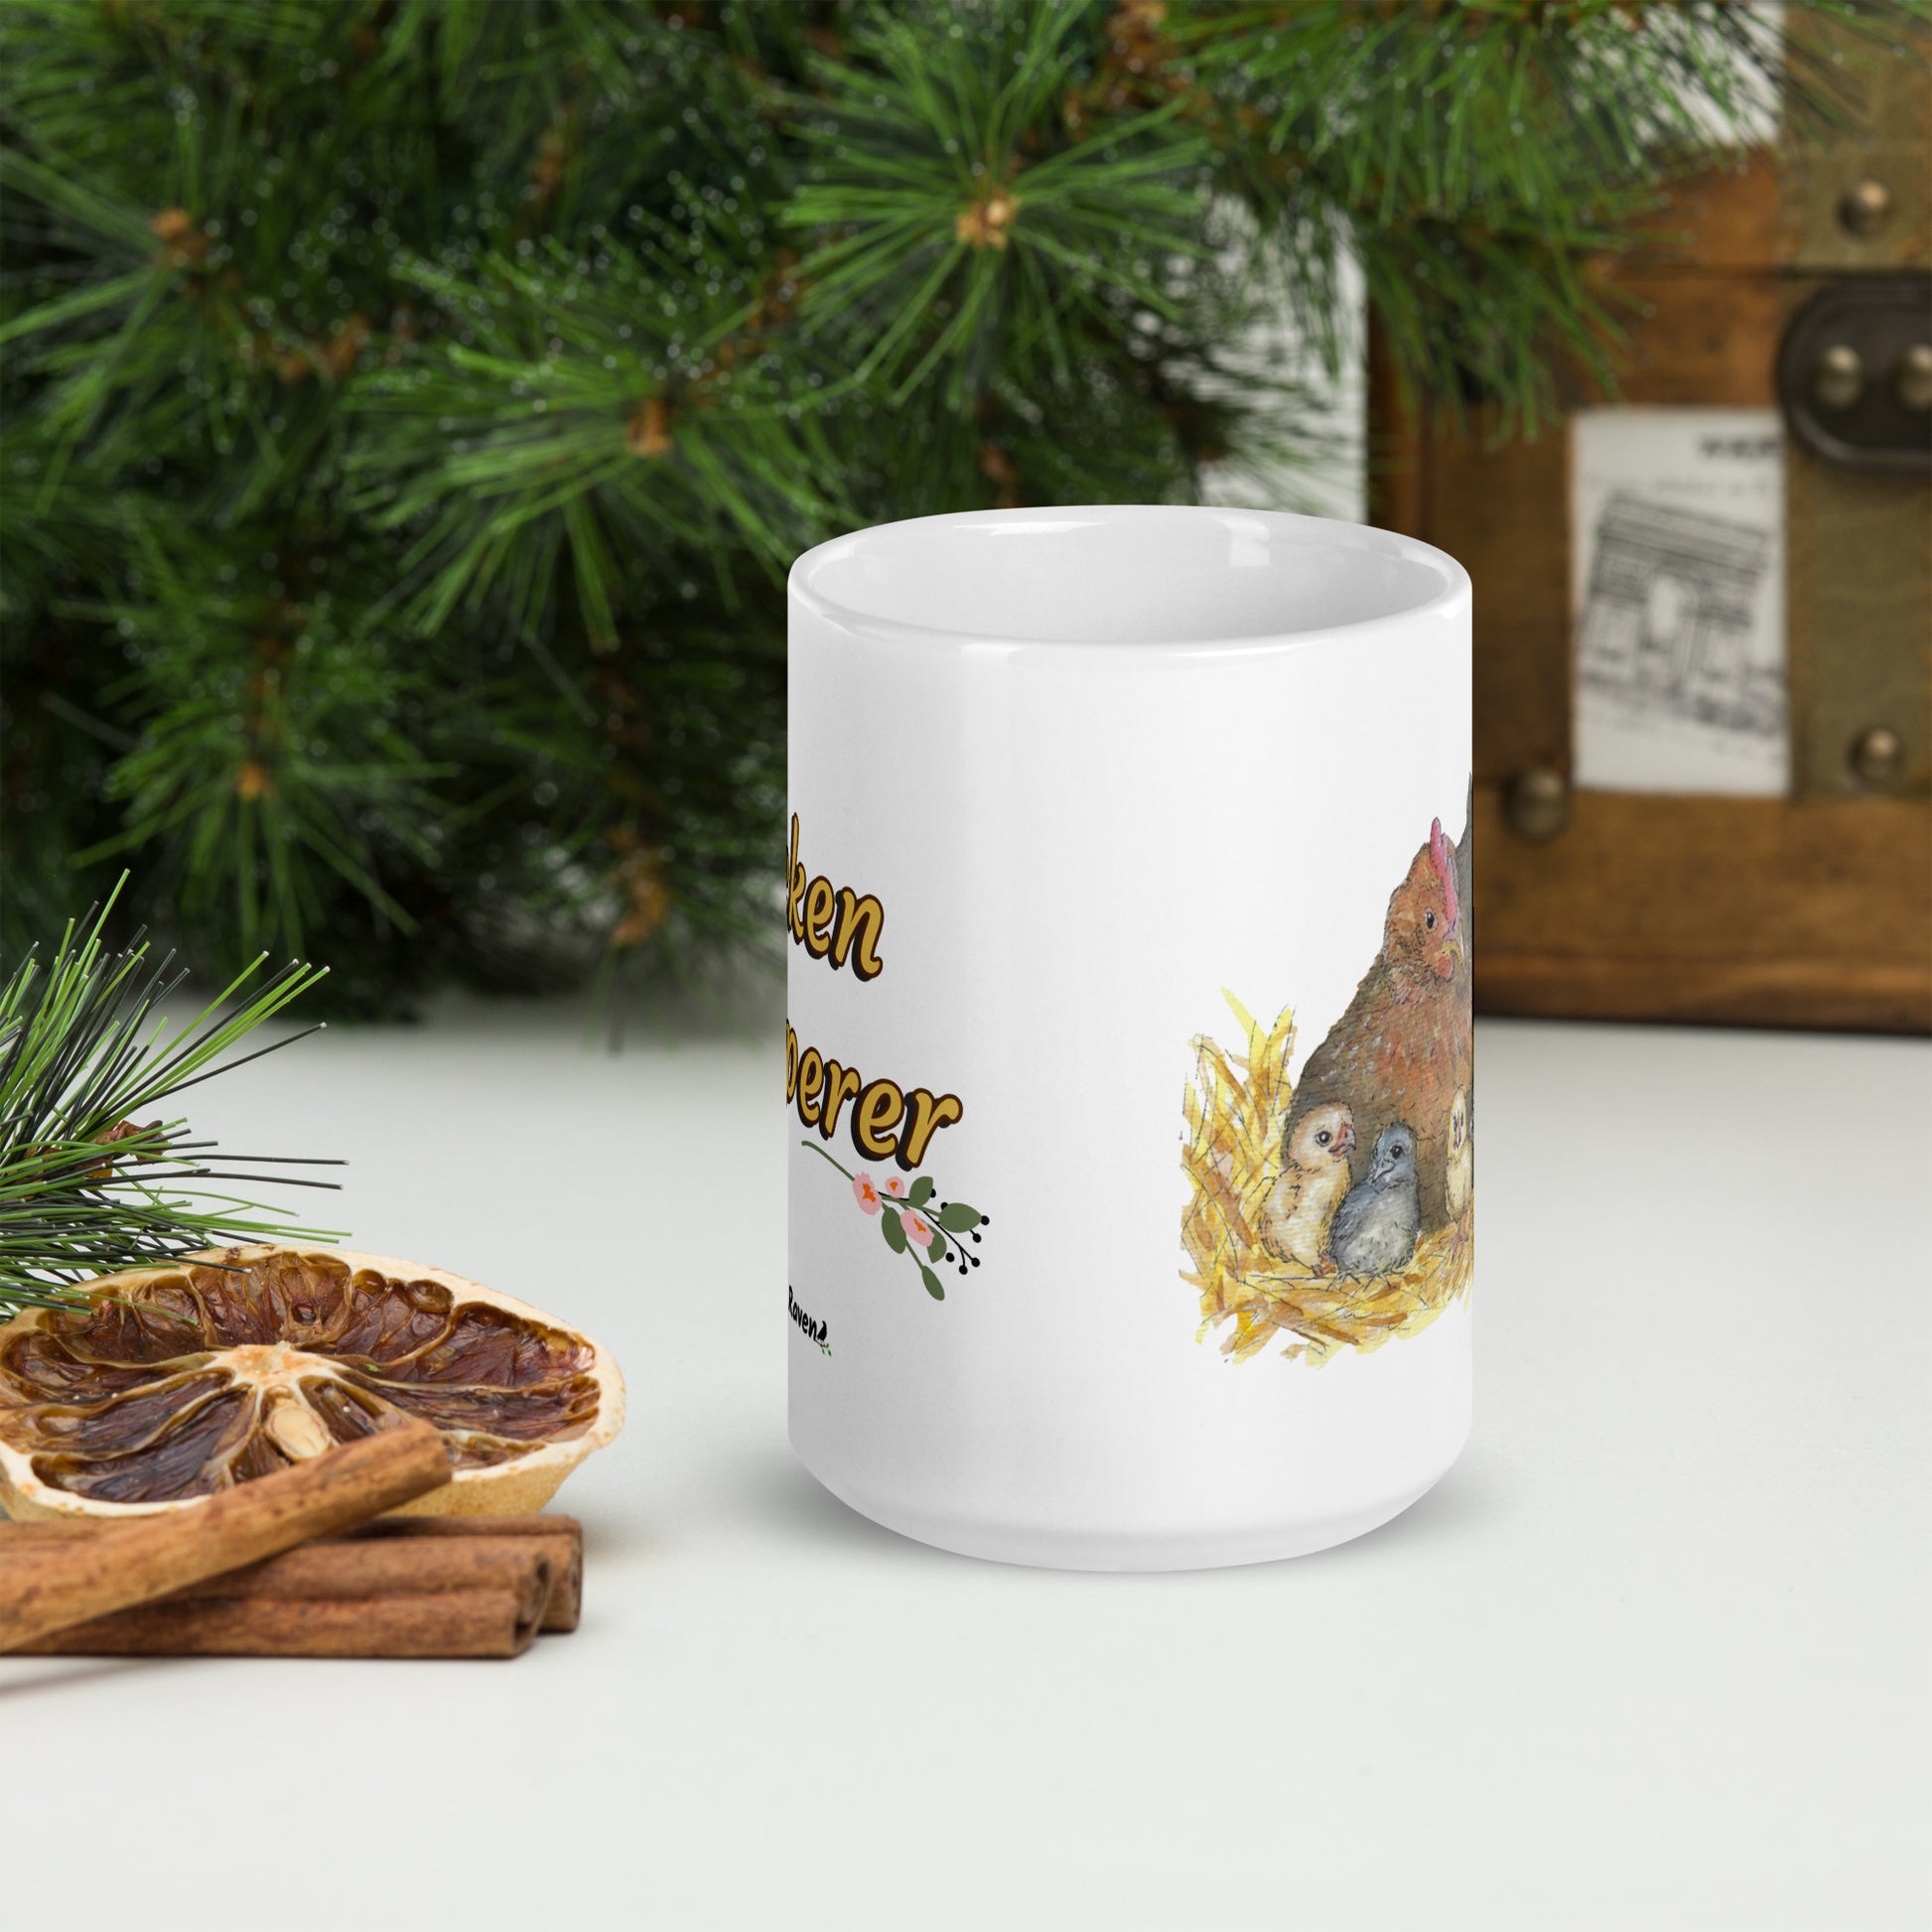 15 ounce white ceramic chicken whisperer mug. Features print of watercolor mother hen and chicks on one side and chicken whisperer text on the other. Dishwasher and microwave safe. Front view shown on tabletop by dried citrus slices and pine boughs.